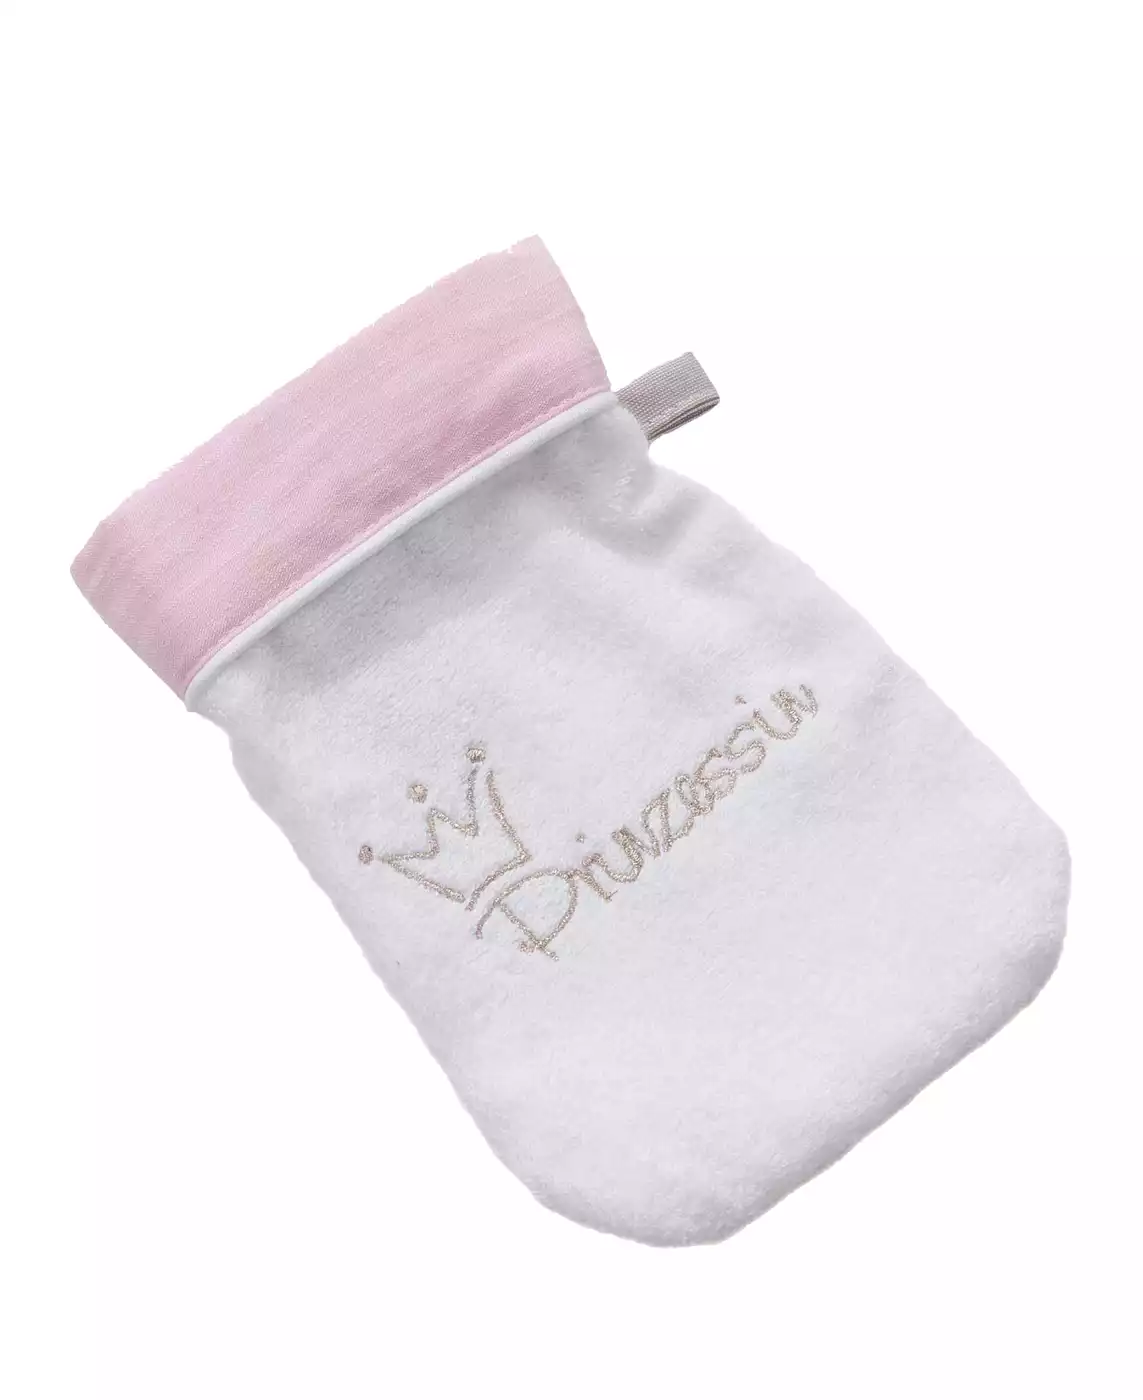 Waschhandschuh Prinzessin BeBes Collection Pink Rosa 2000564724105 3